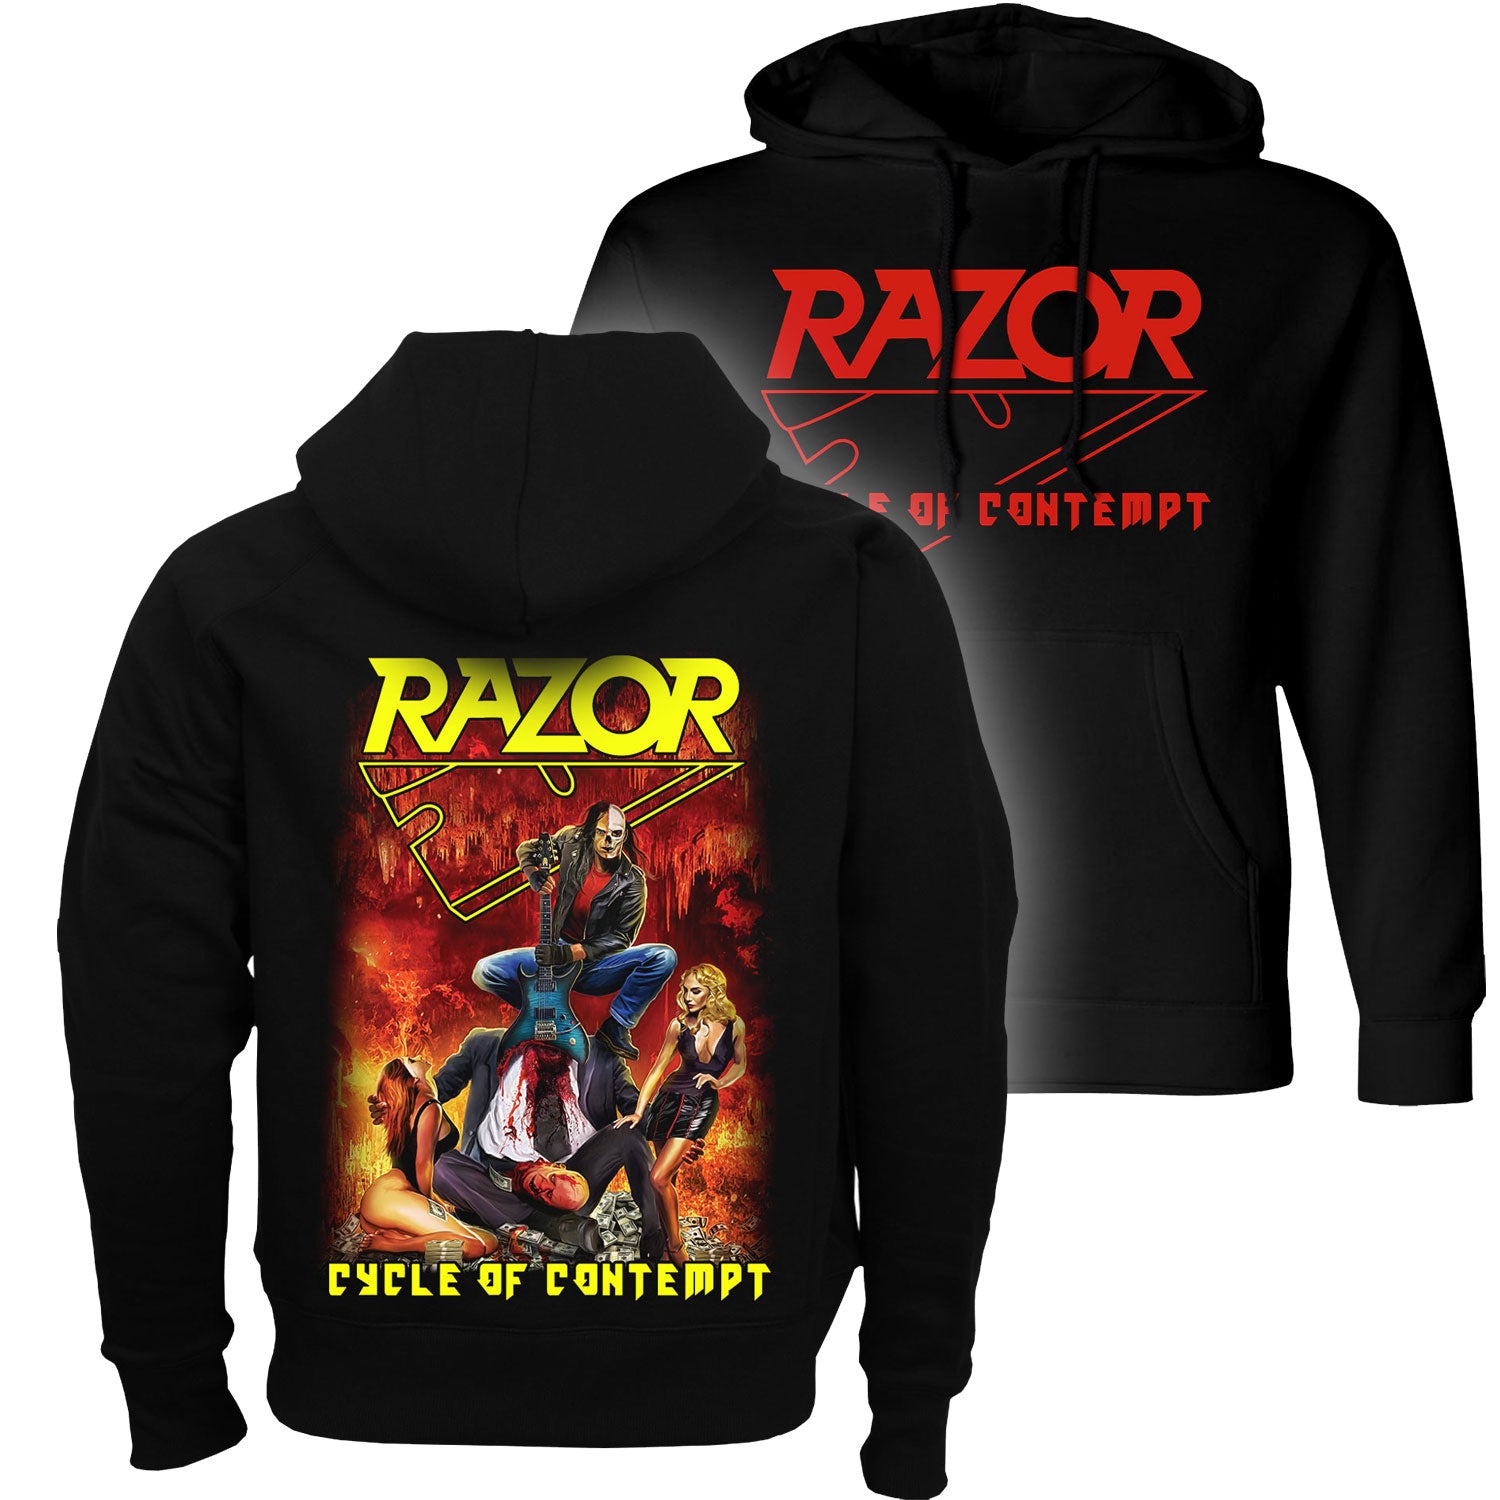 Razor "Cycle of Contempt" Pullover Hoodie